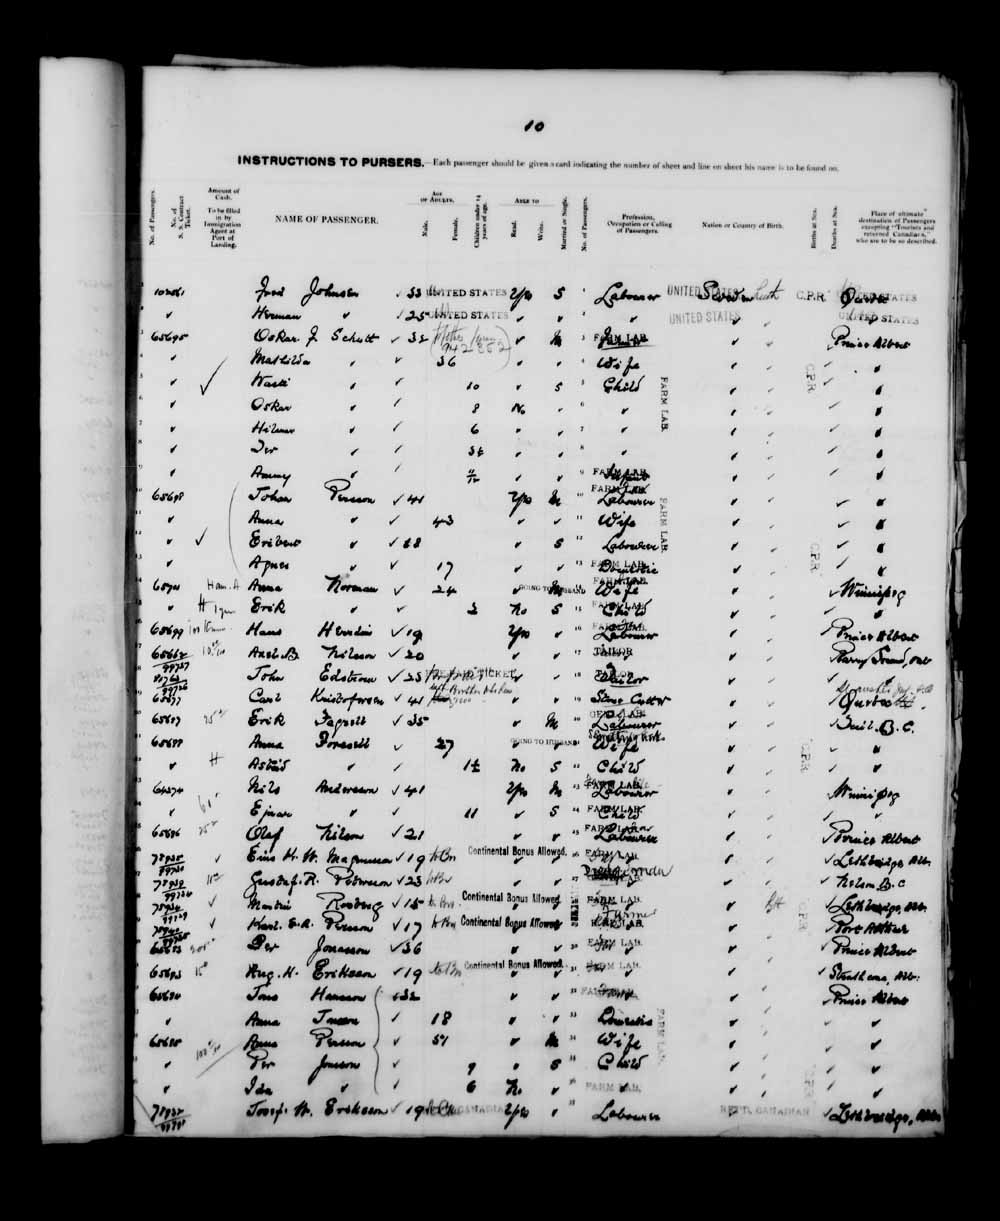 Digitized page of Quebec Passenger Lists for Image No.: e003591260